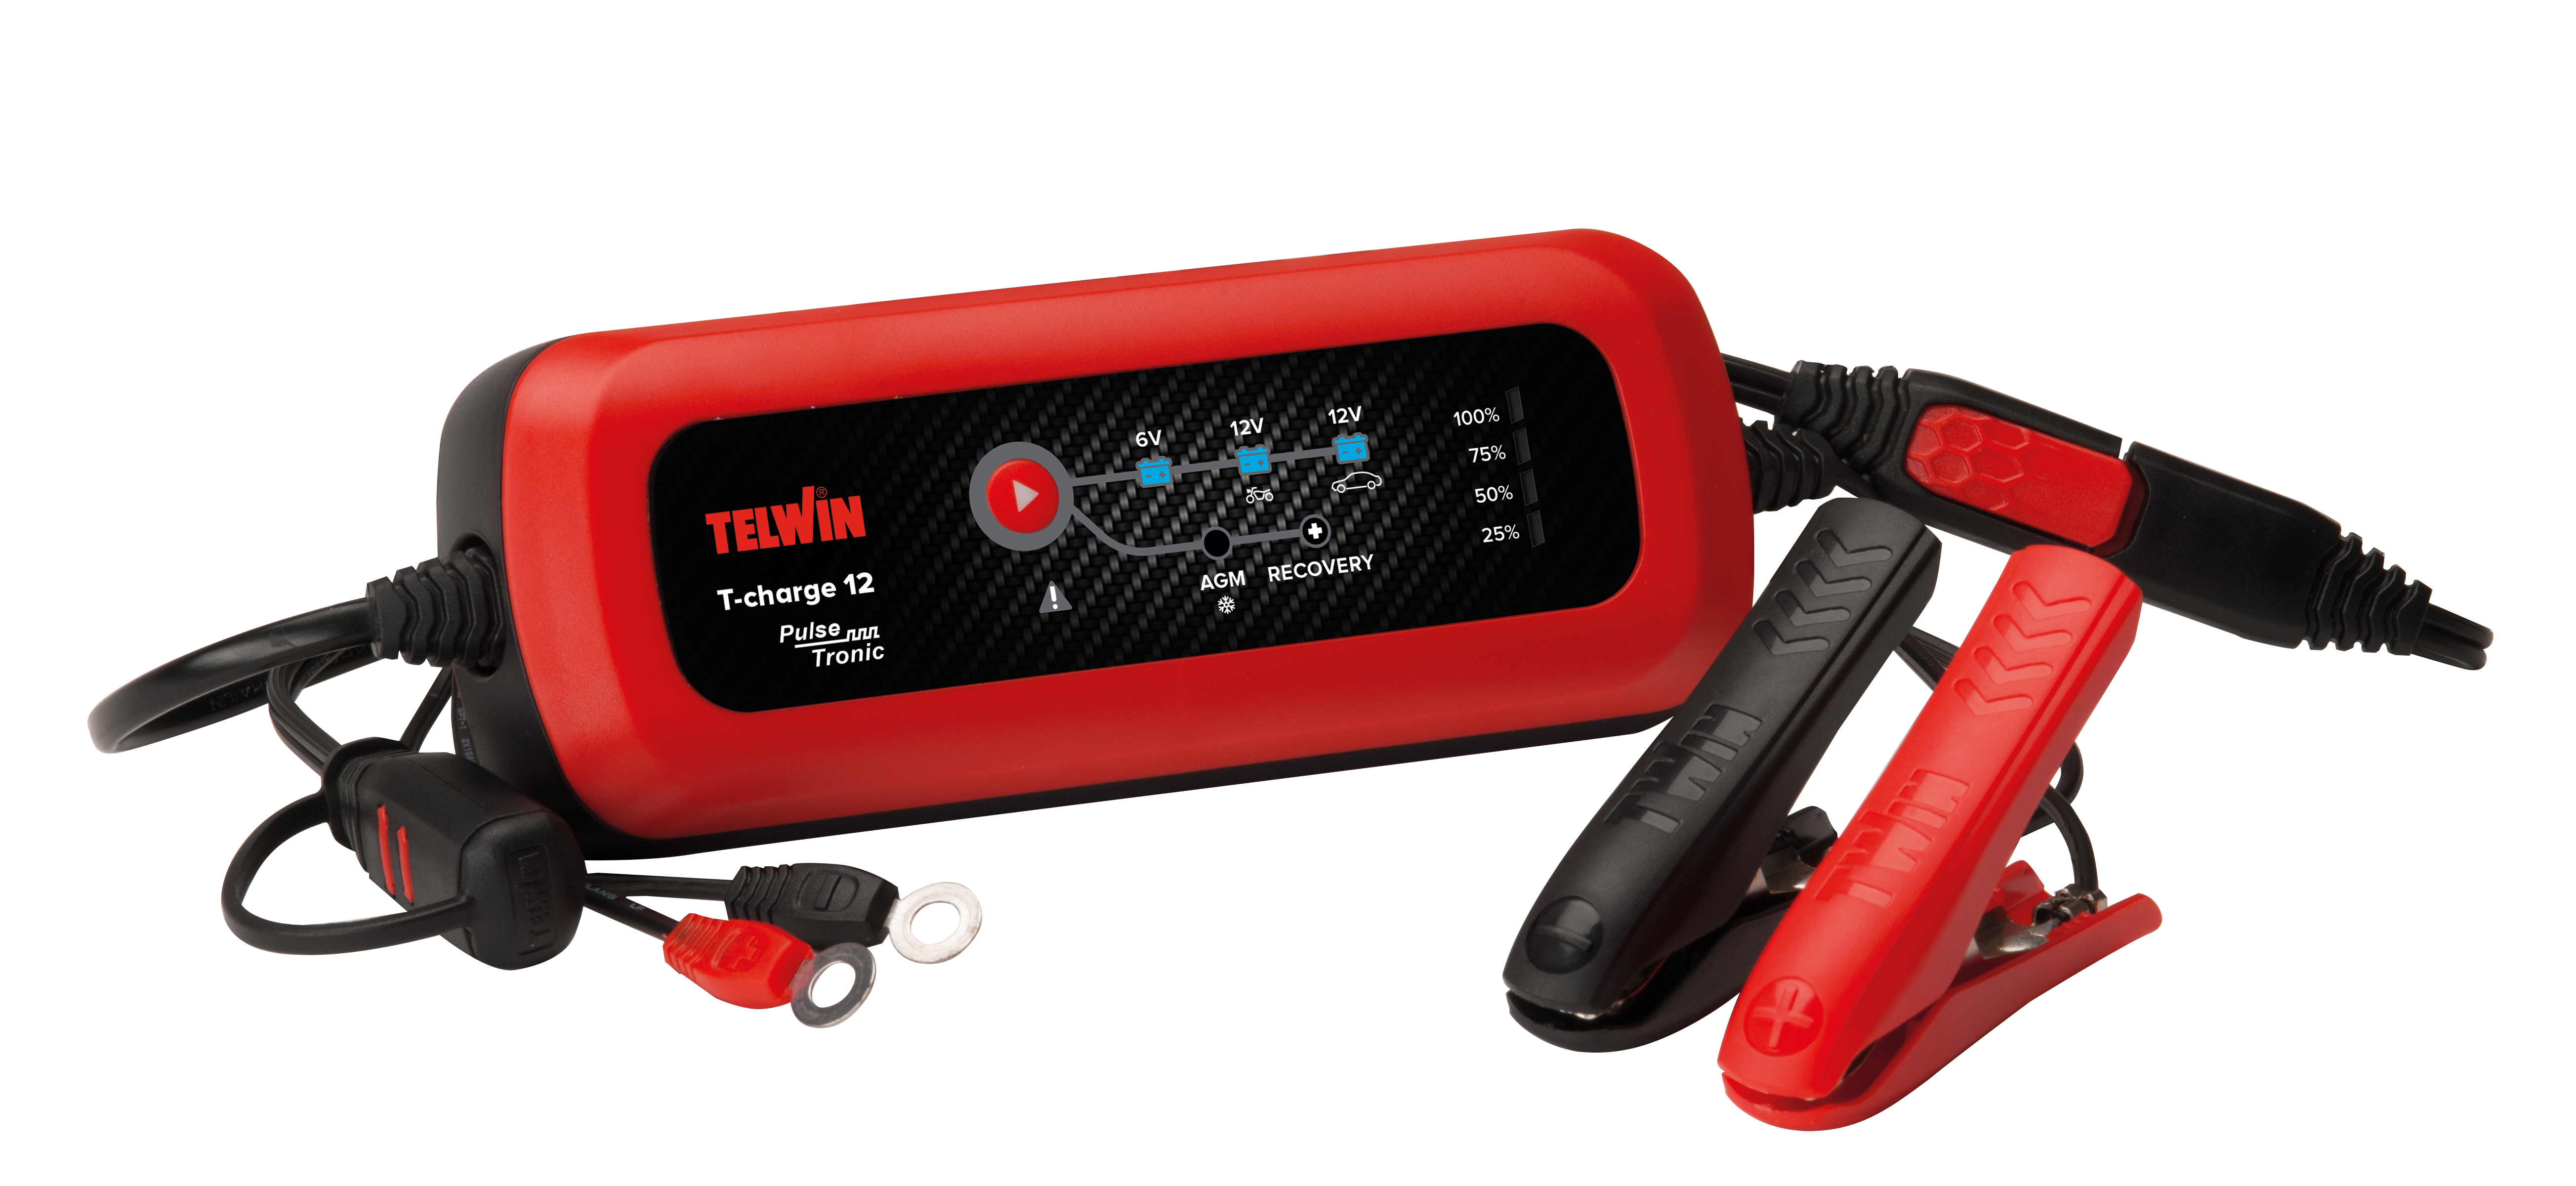 TELWIN BATTERY CHARGER T-CHARGE 12 6V/12V - Matthys